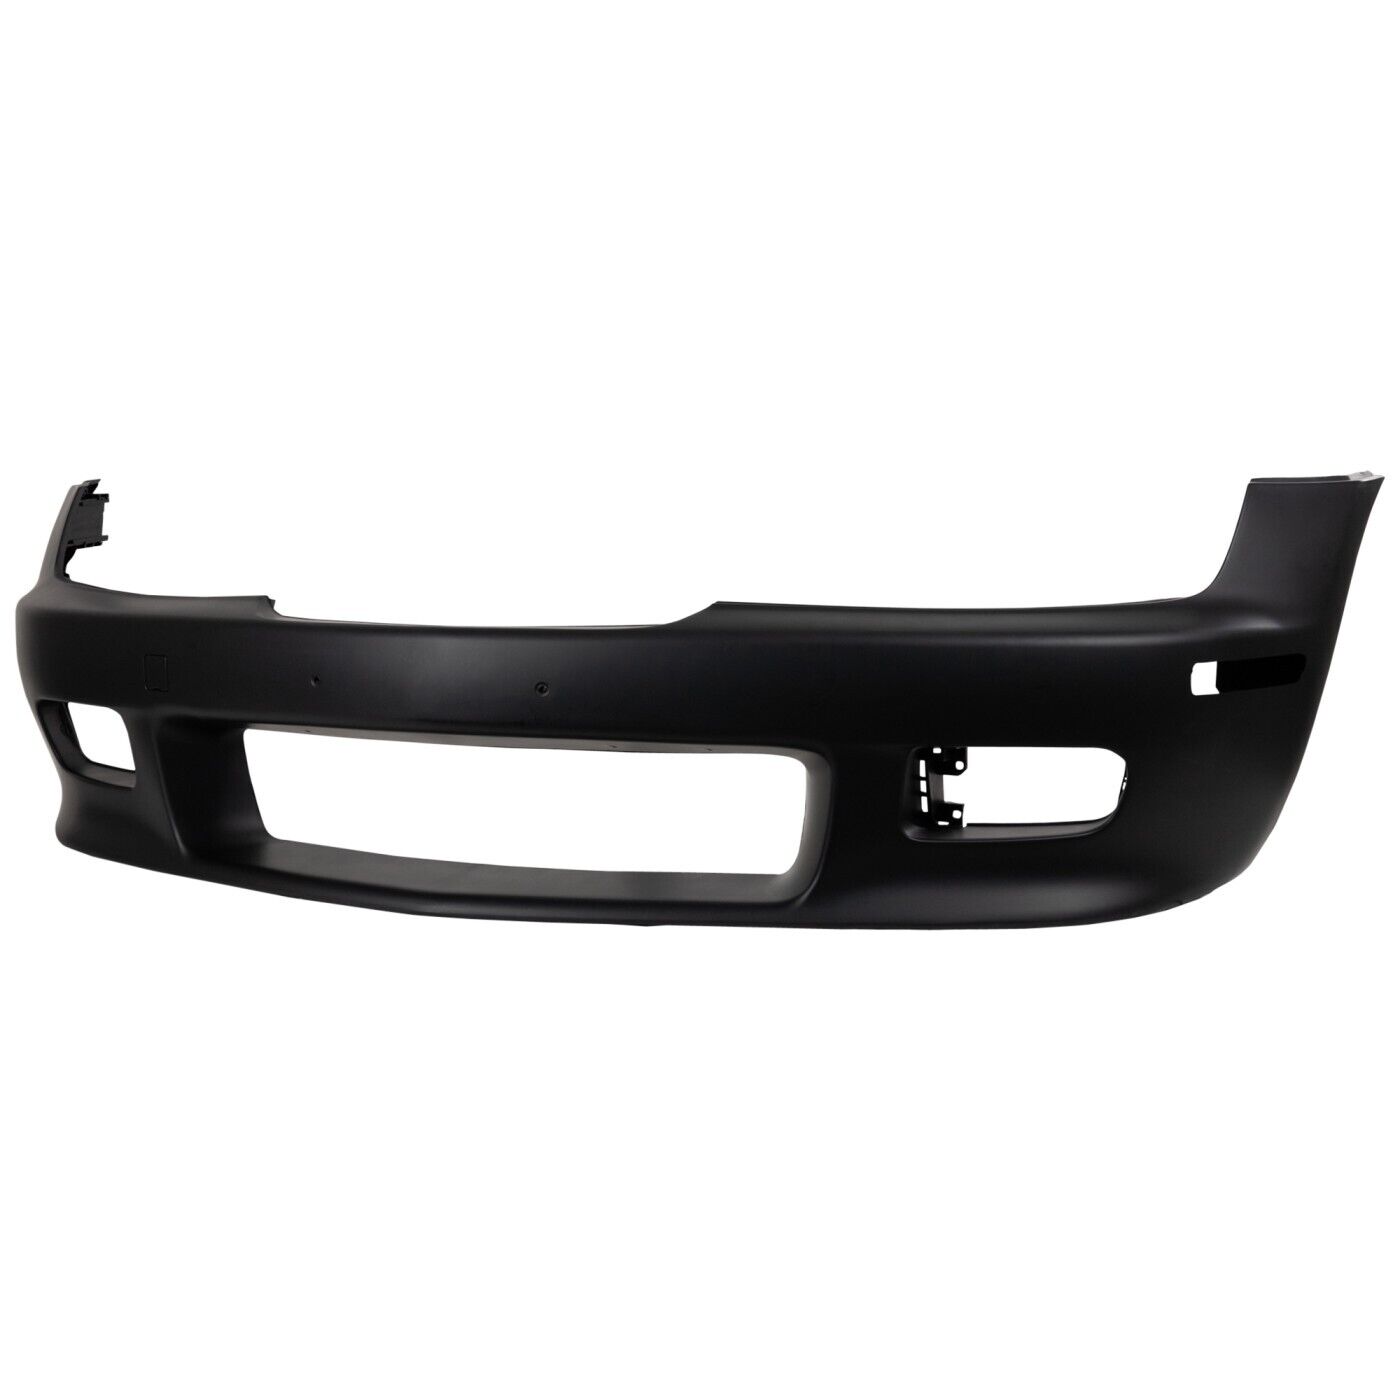 Front Bumper Cover Primed For 1997-2002 BMW Z3 with 6 Cyl. Eng.